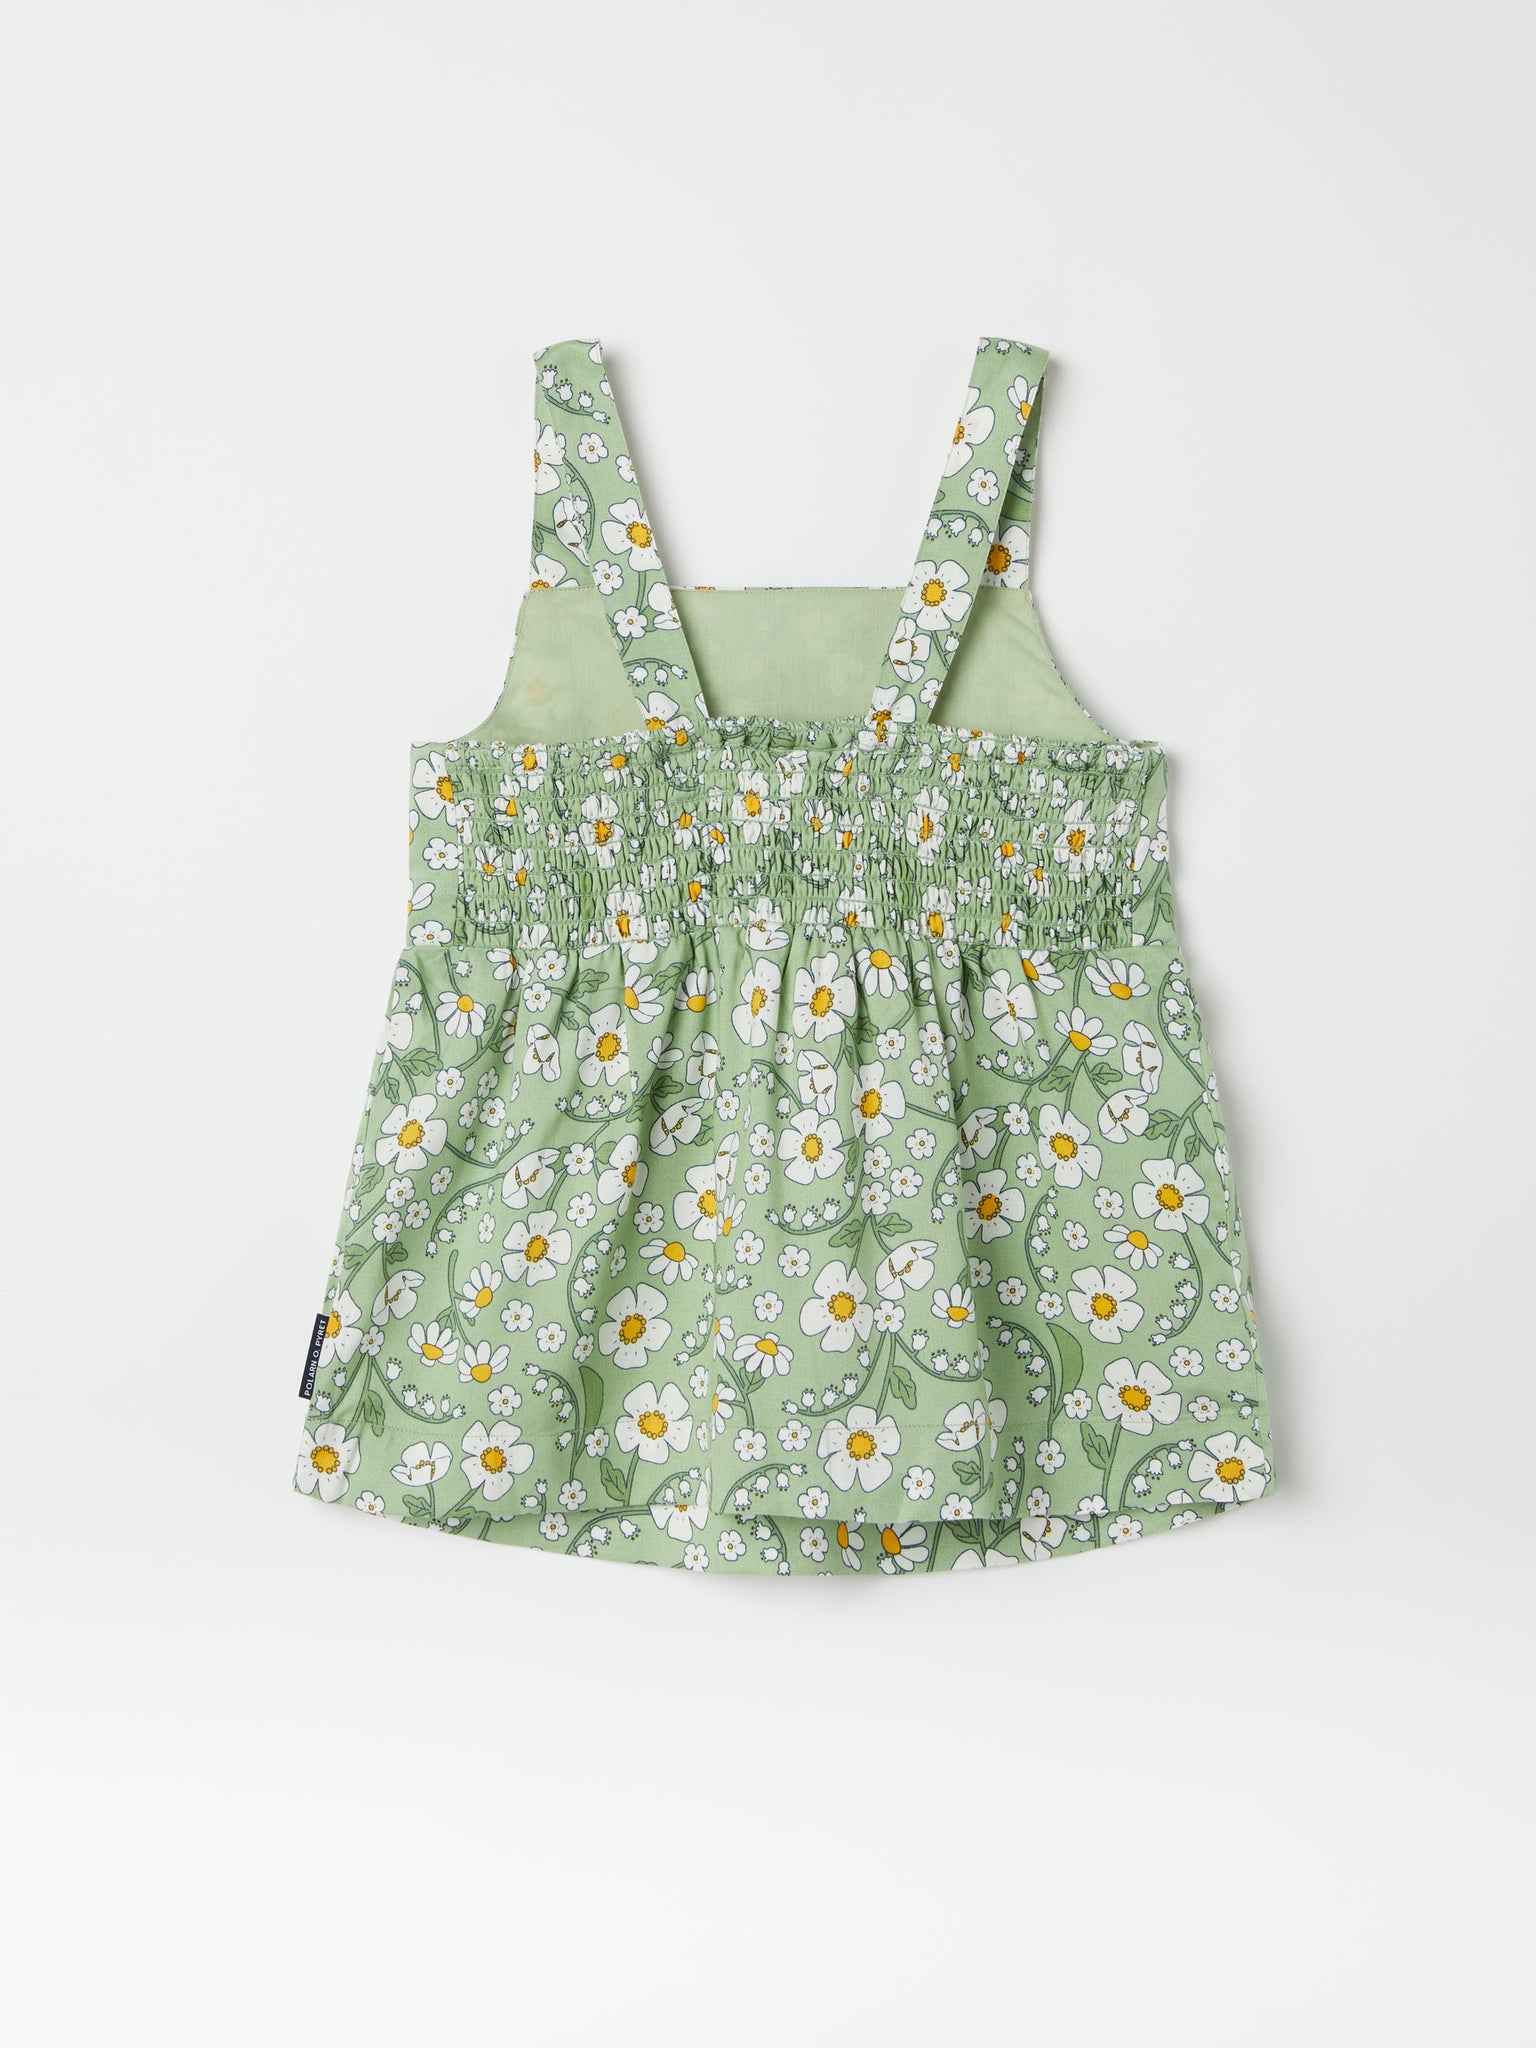 Daisy Print Cotton Kids Vest Top from the Polarn O. Pyret kidswear collection. Clothes made using sustainably sourced materials.